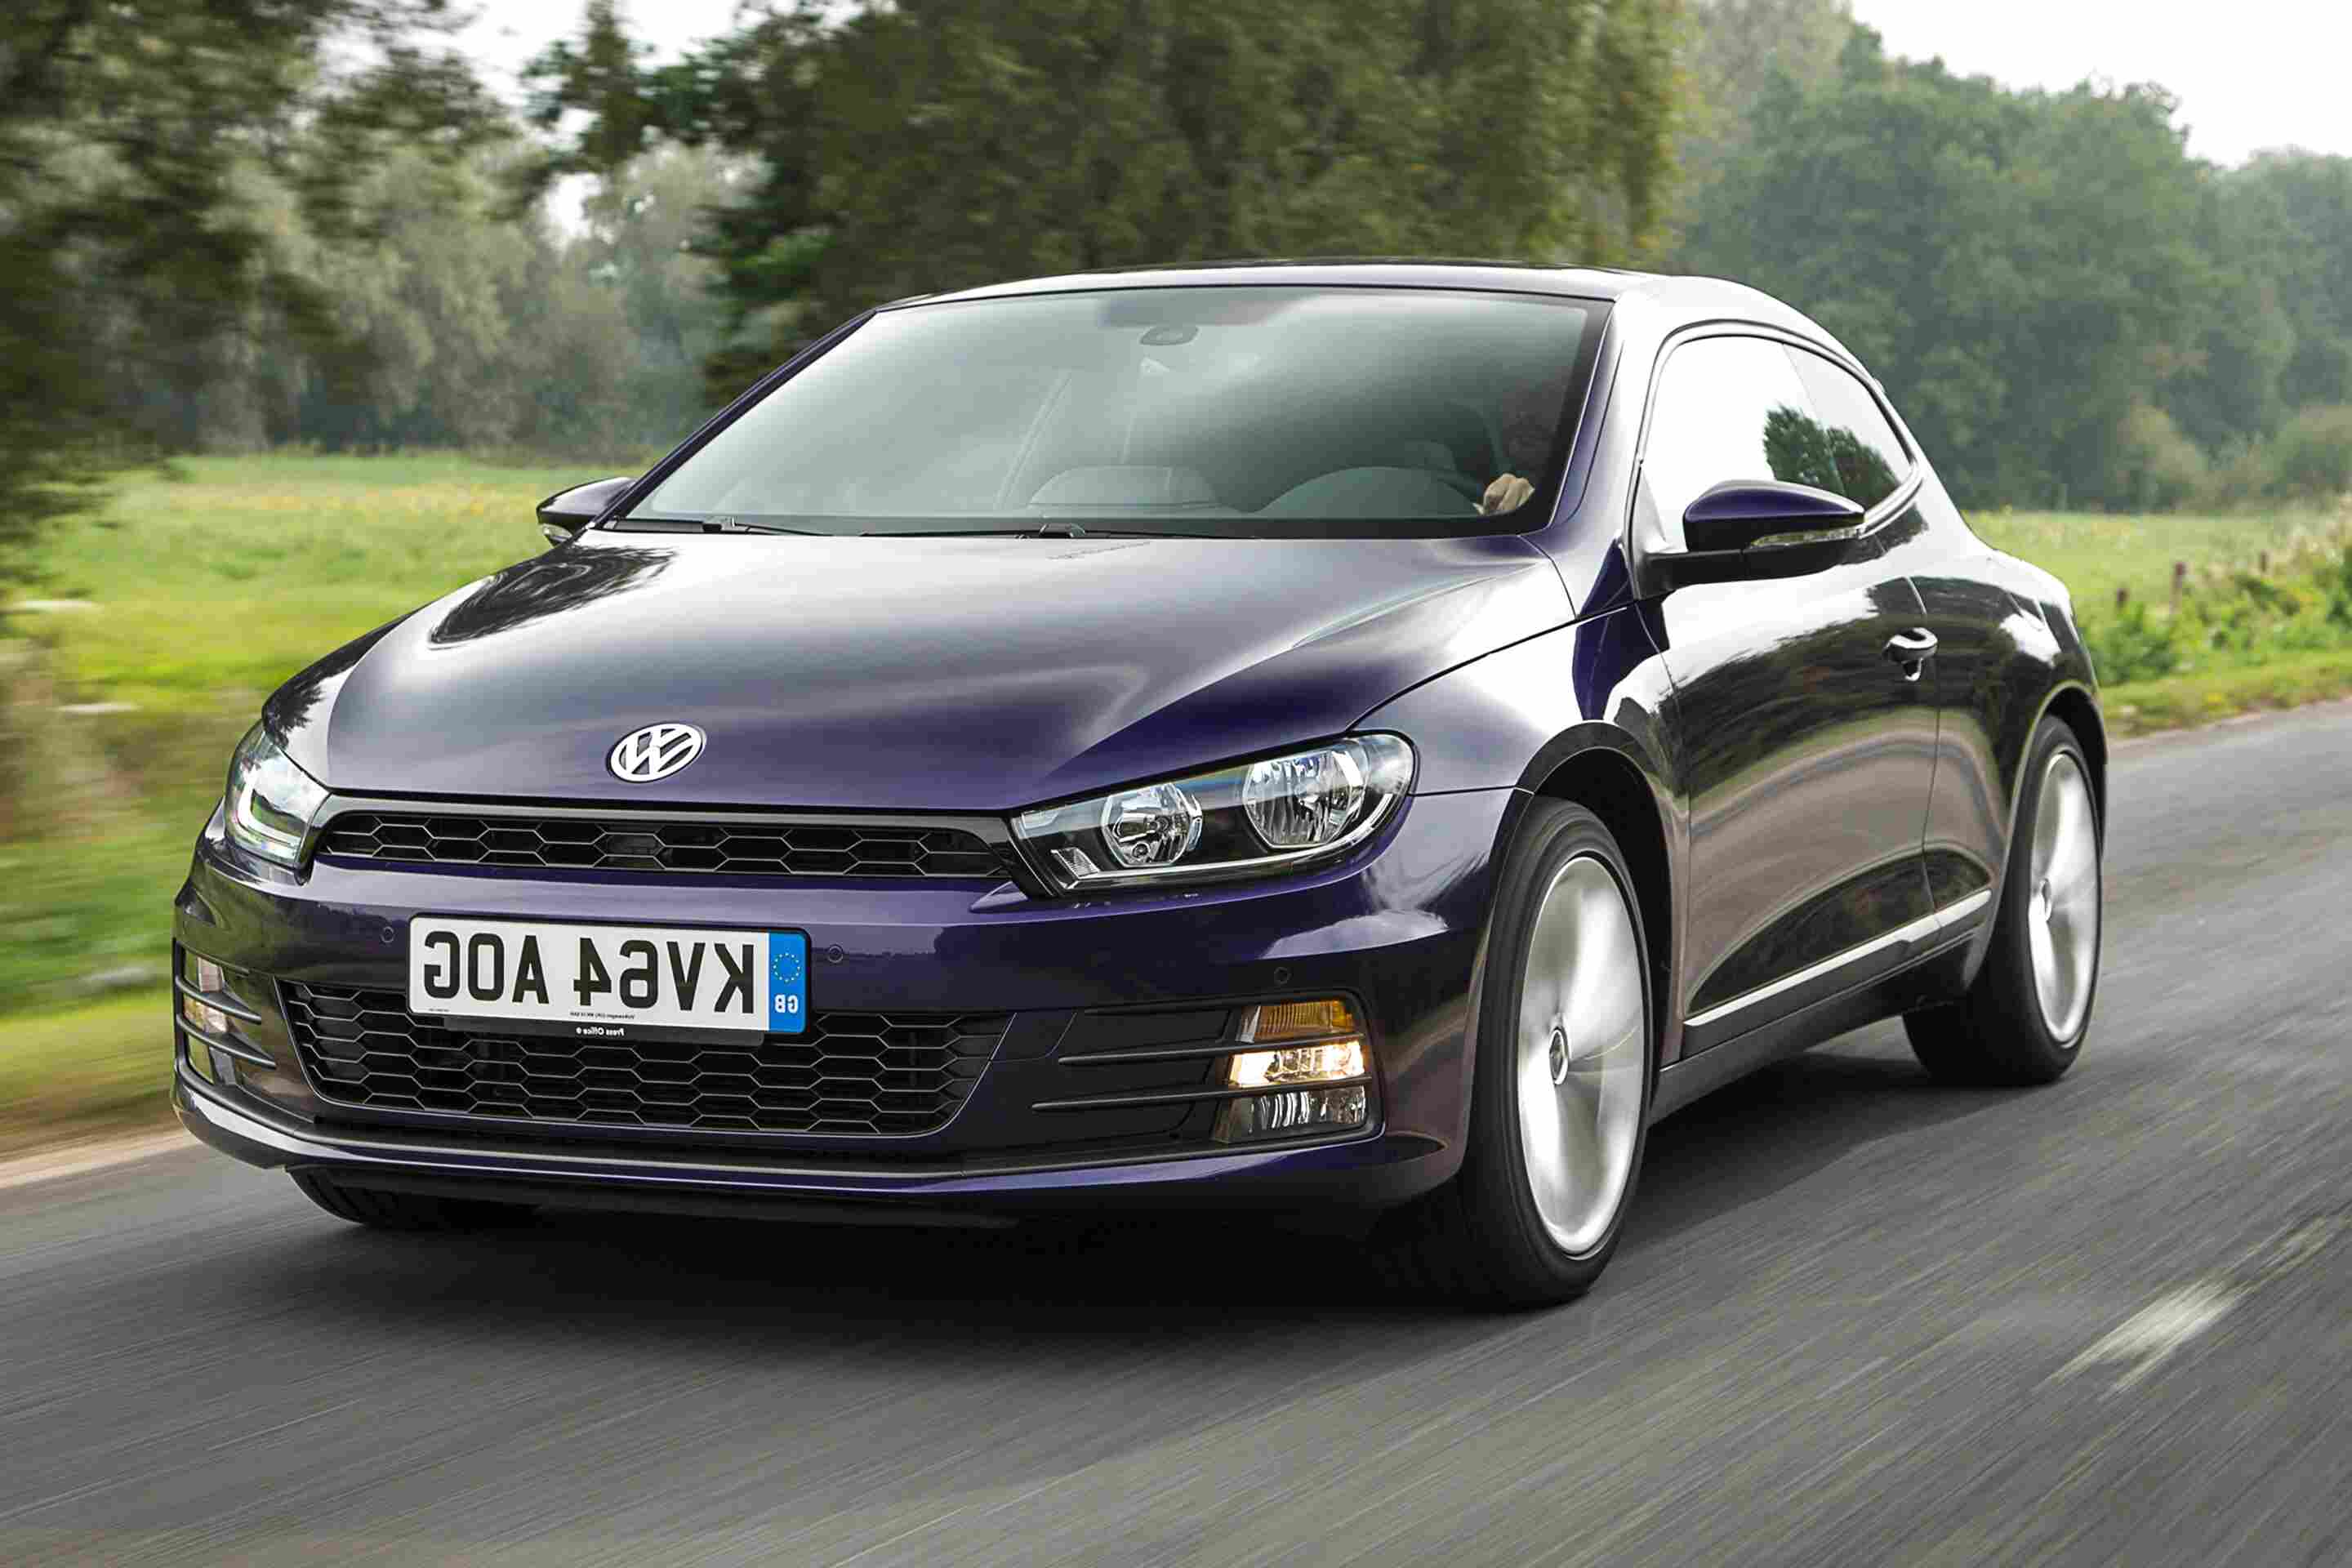 Vw Scirocco 1 4 Tsi for sale in UK View 40 bargains